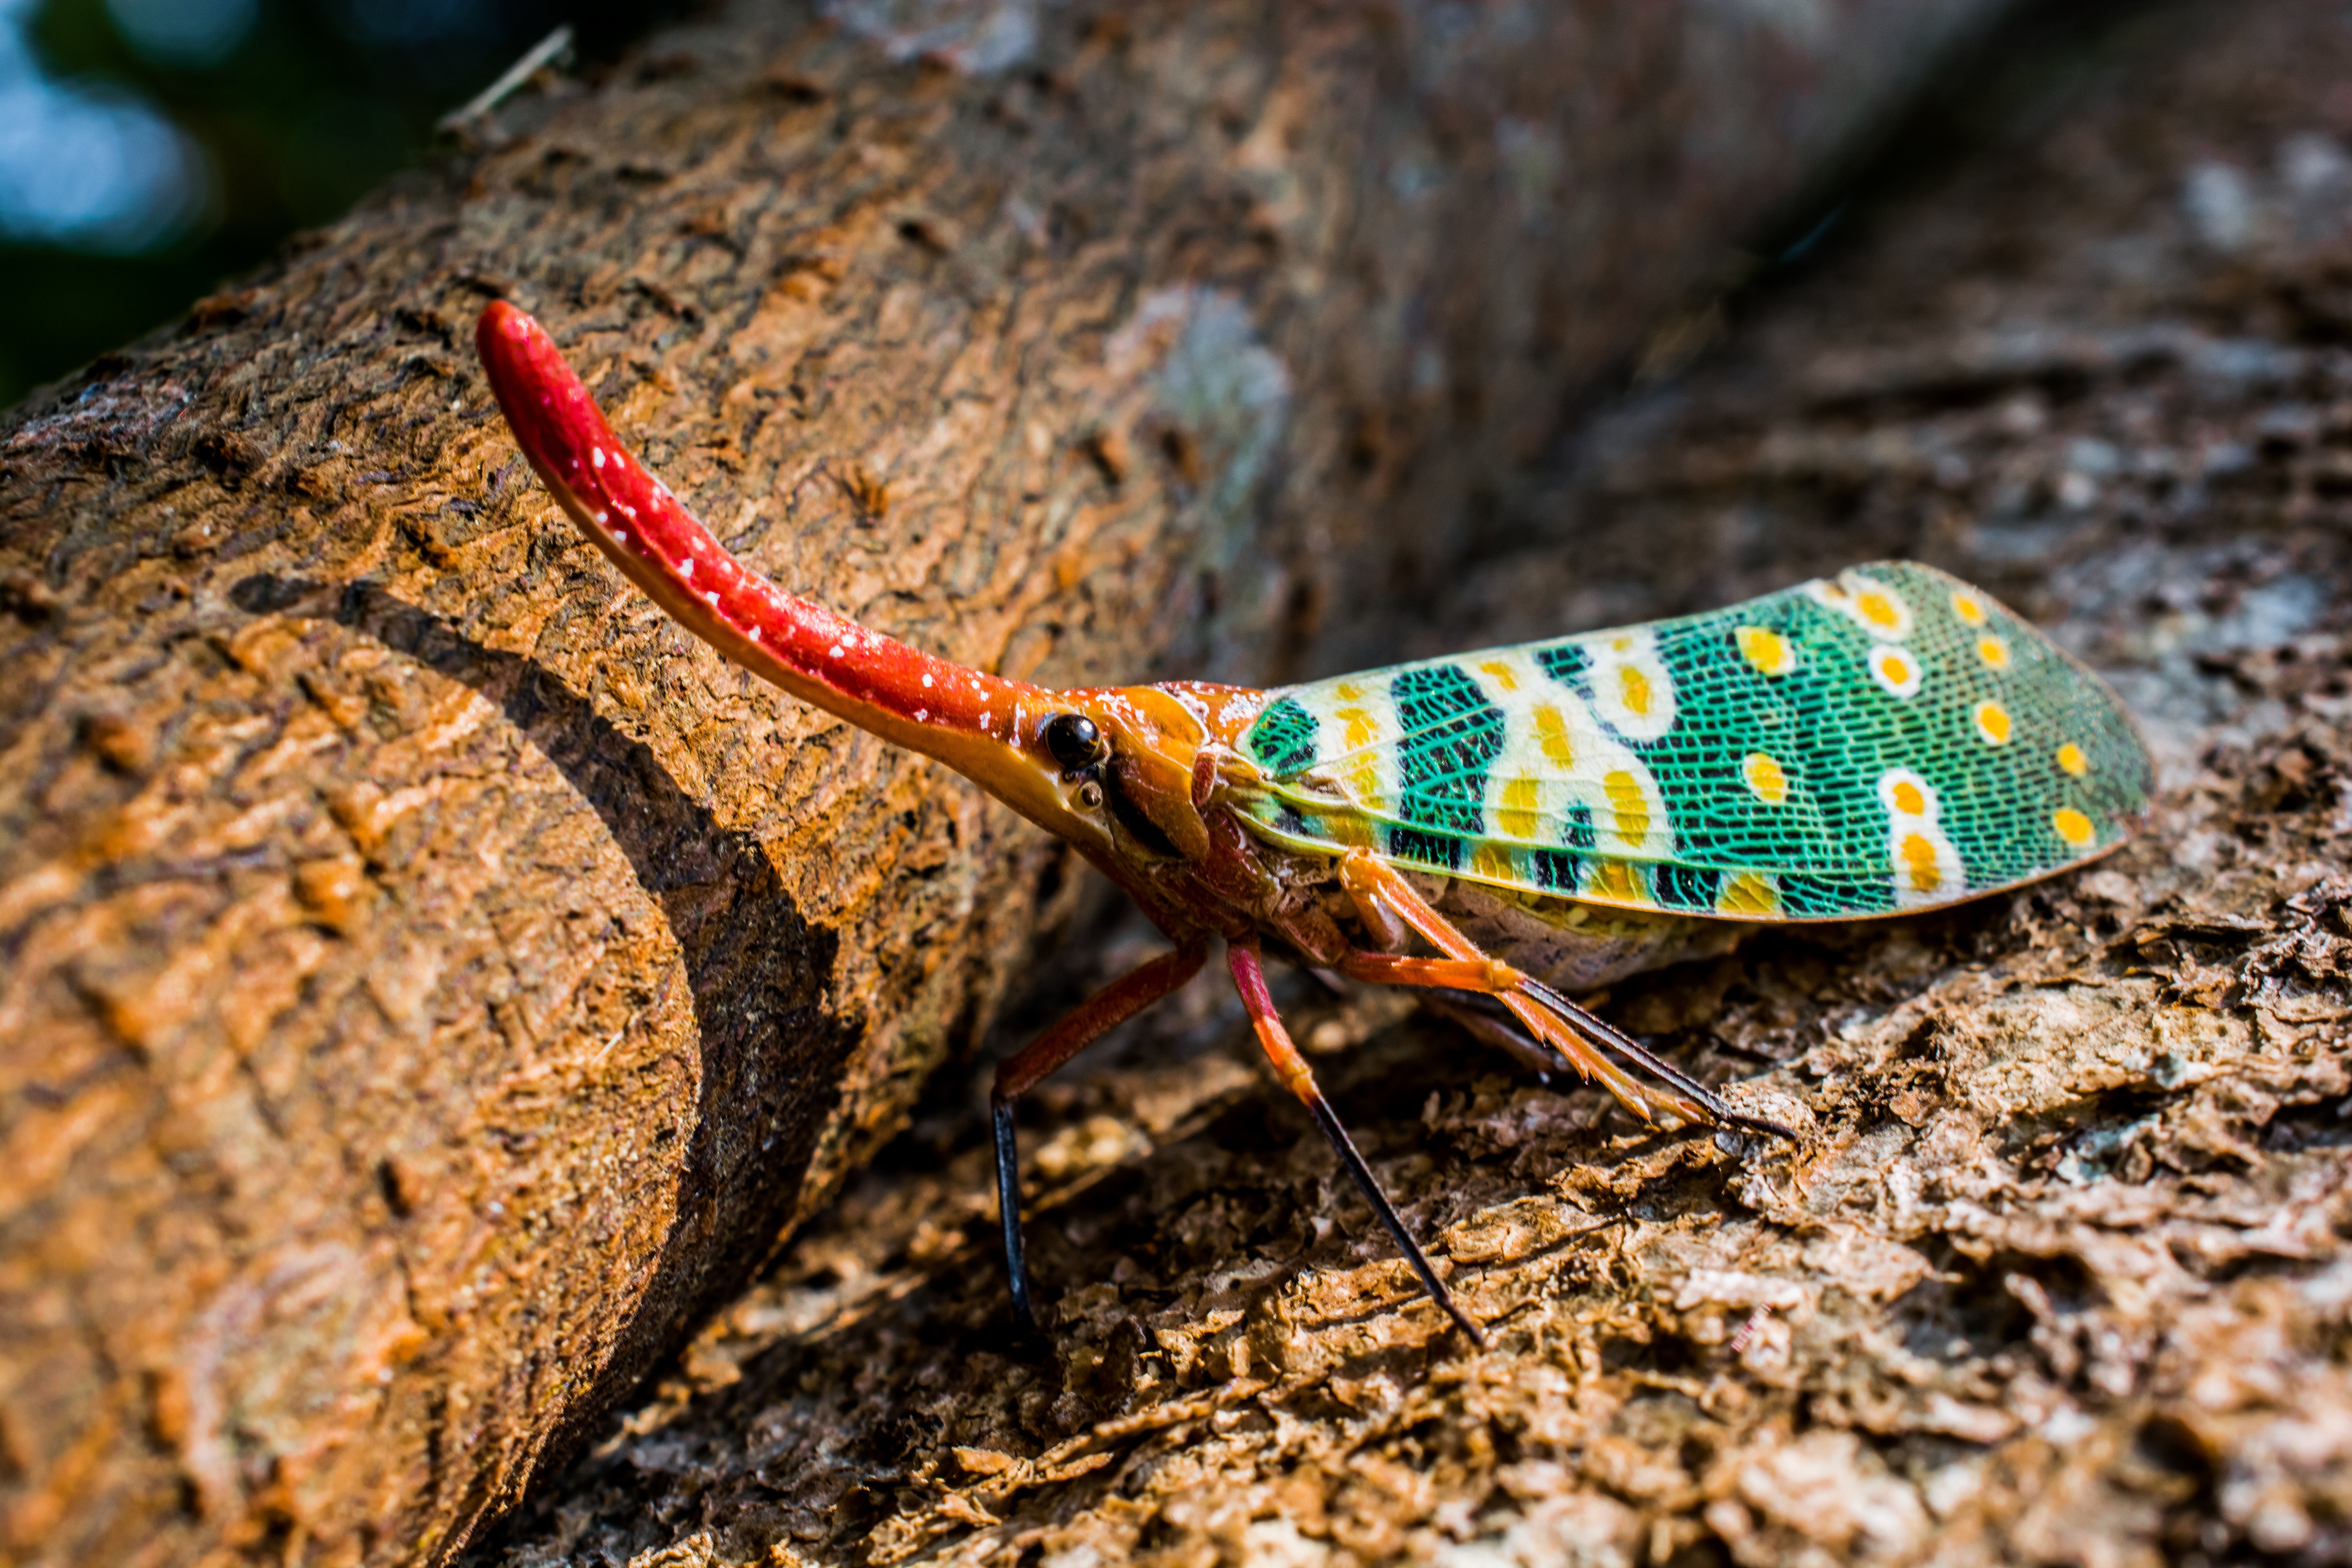 Free stock photos of canthigaster cicada · Pexels.